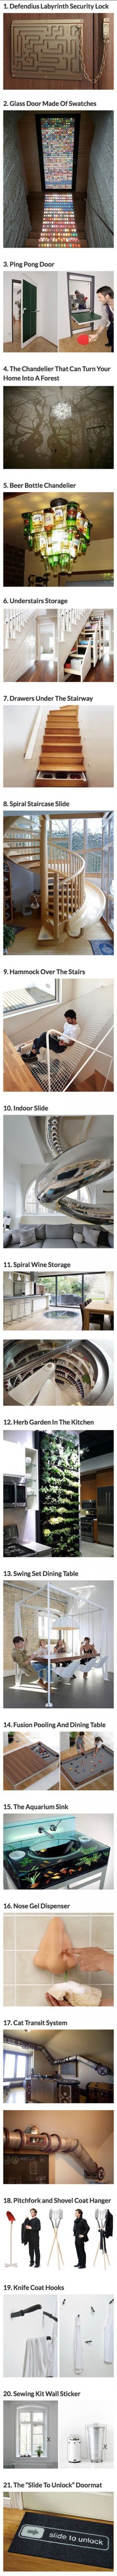 Some of these ideas would be AMAZING fun depending on my future home style. Especially the shovel and pitchfork!!: